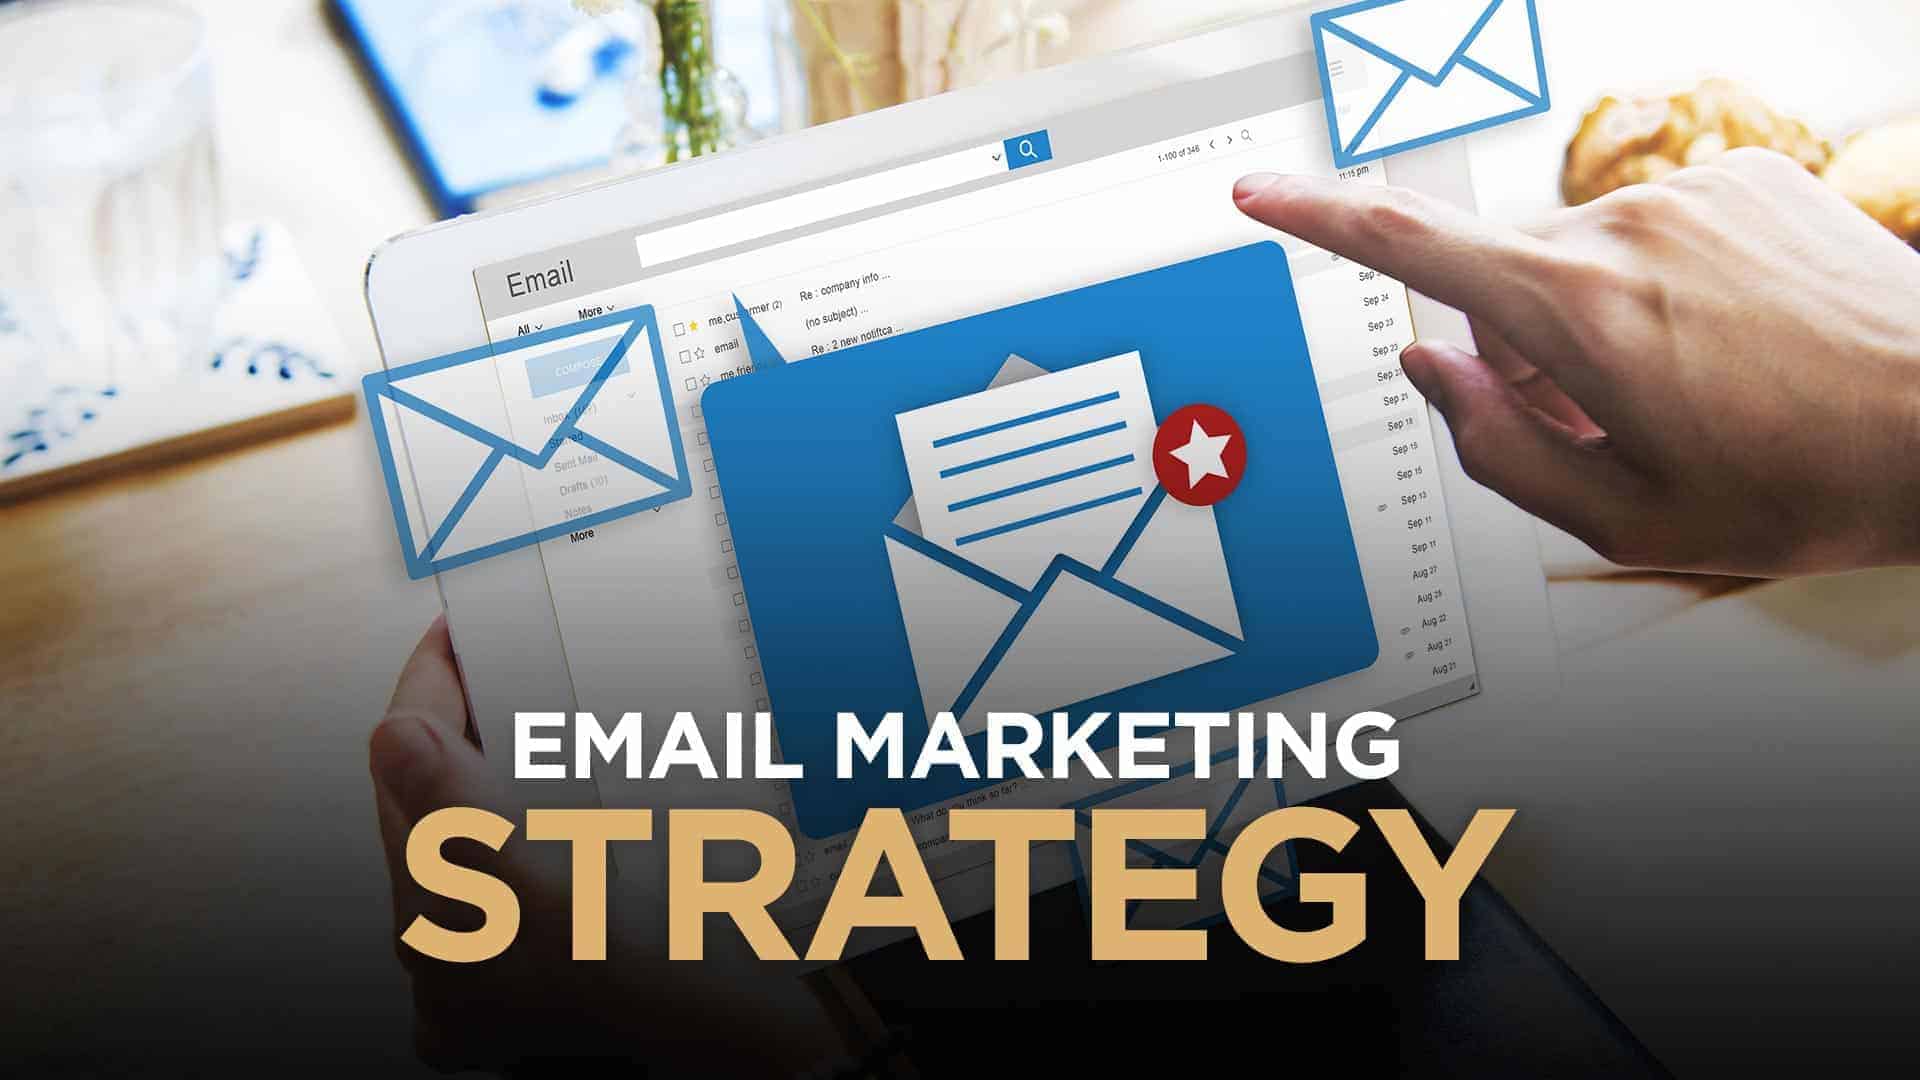 Personalize Email Marketing Strategy